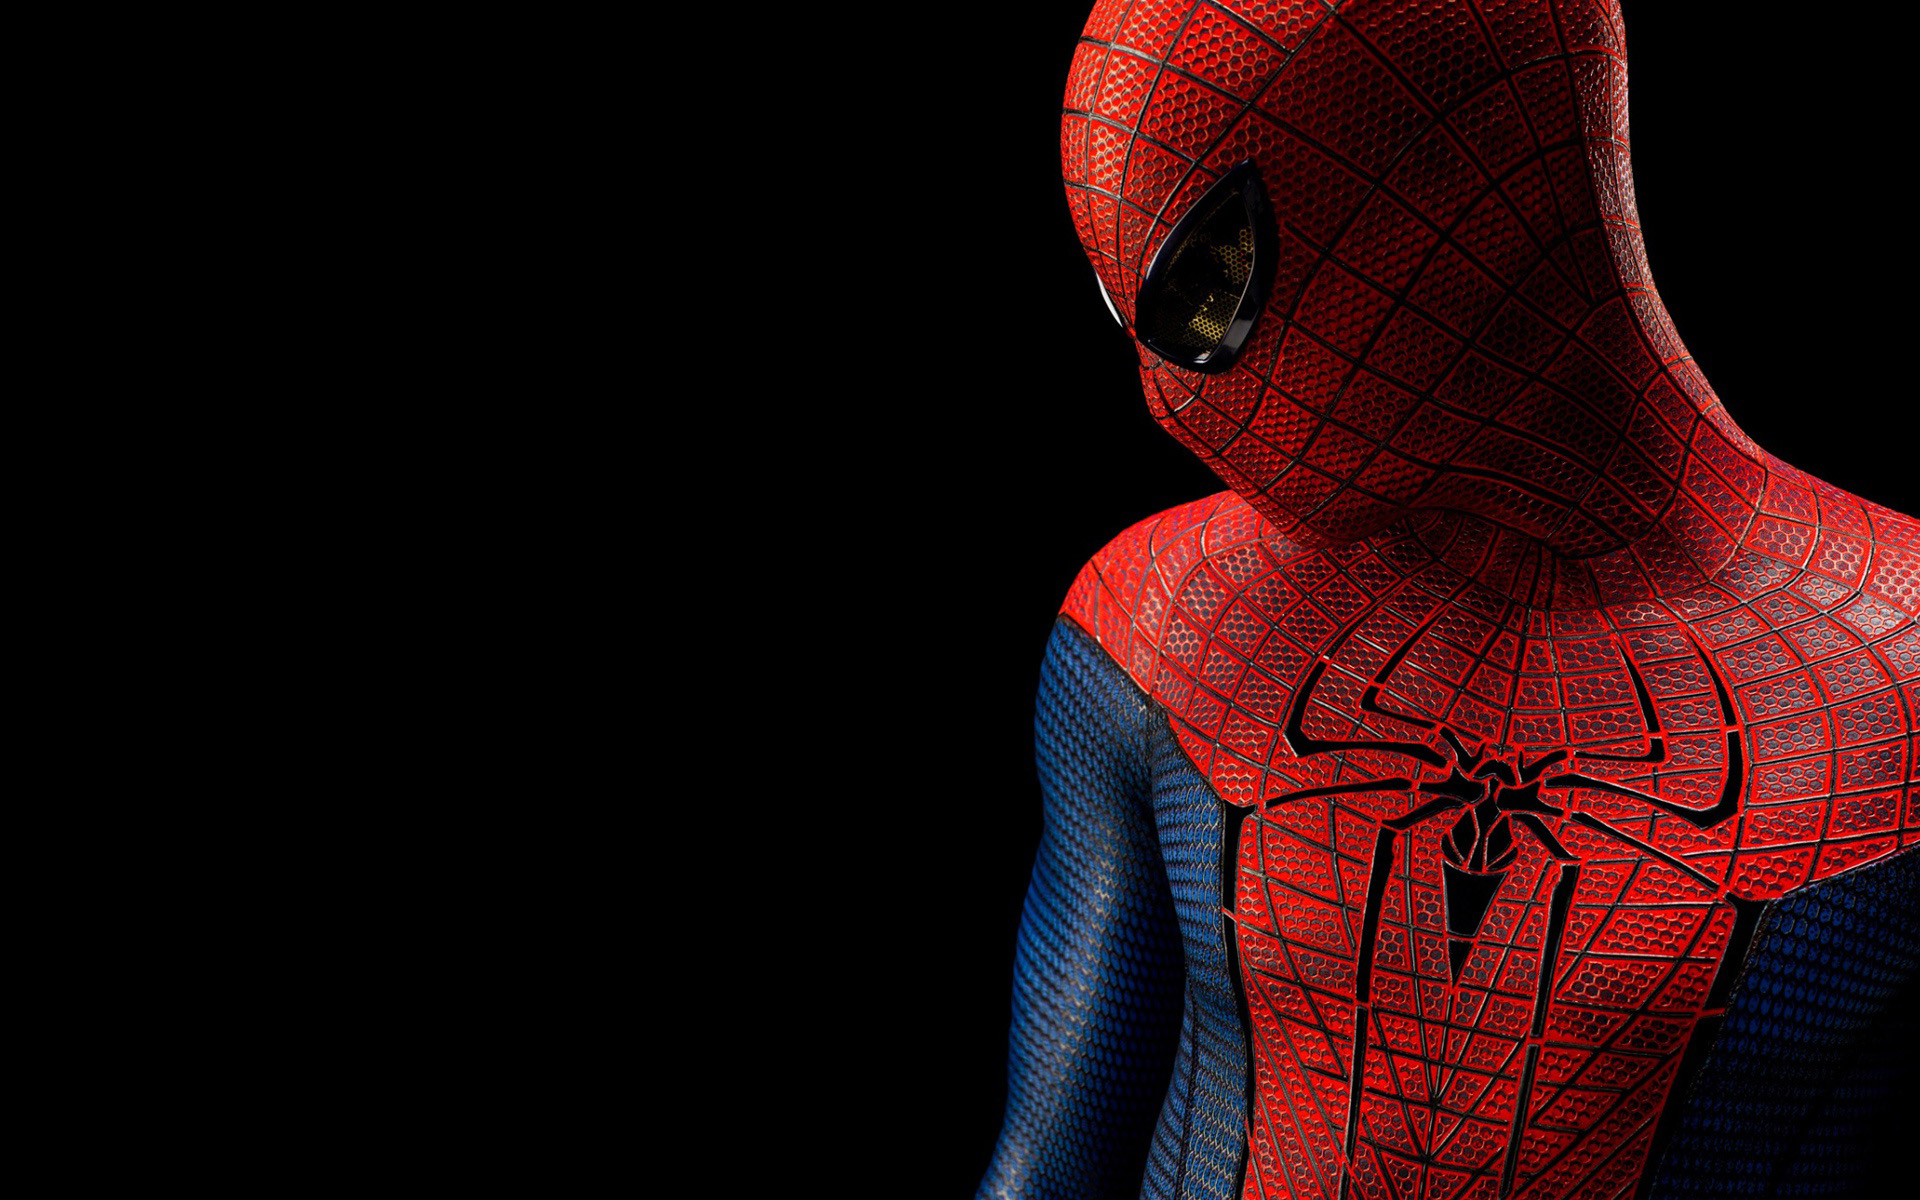 Galaxy Background Covers Spiderman Spider Man Wallpaper